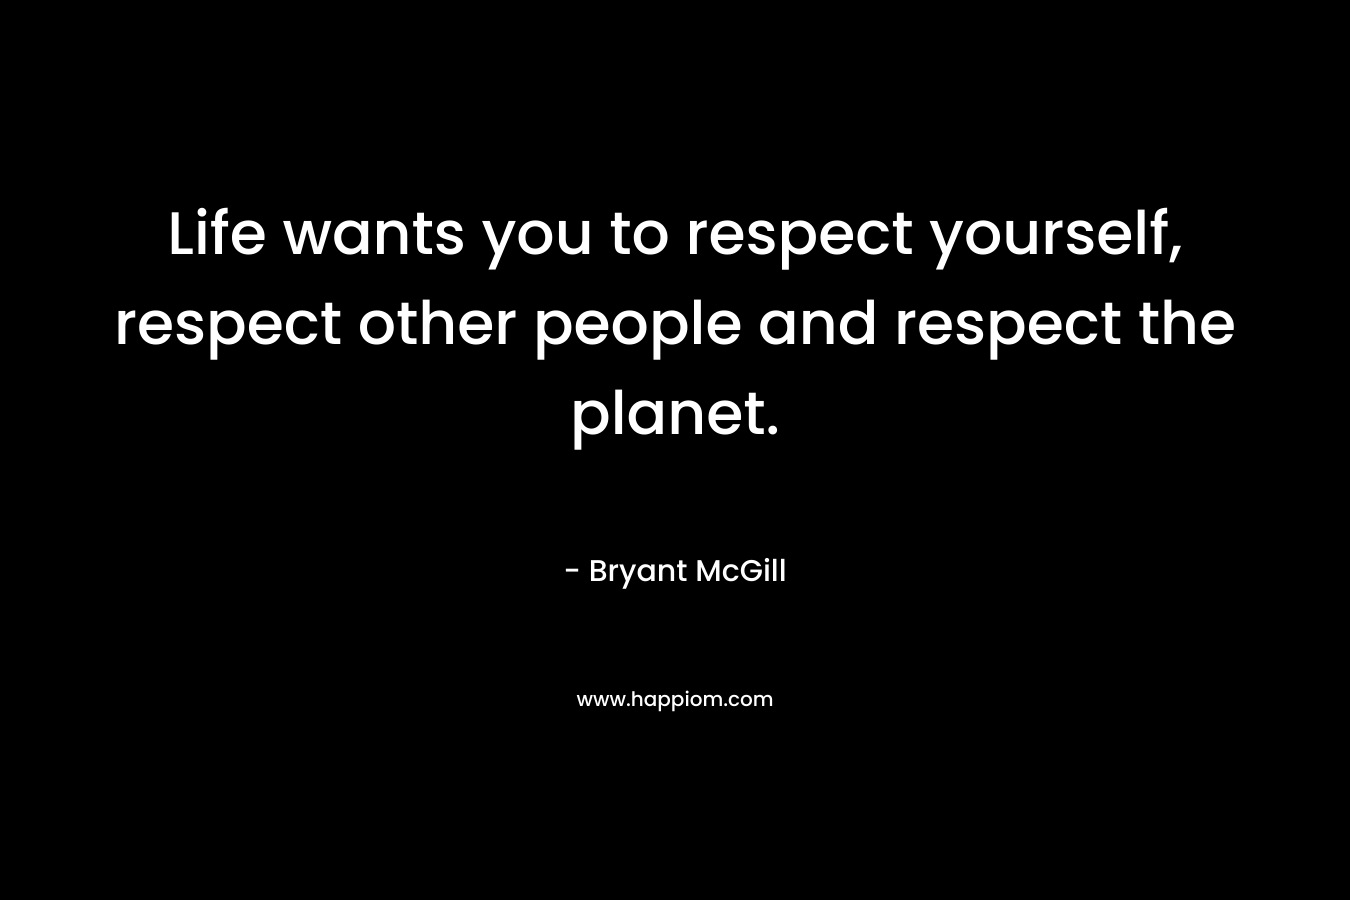 Life wants you to respect yourself, respect other people and respect the planet.